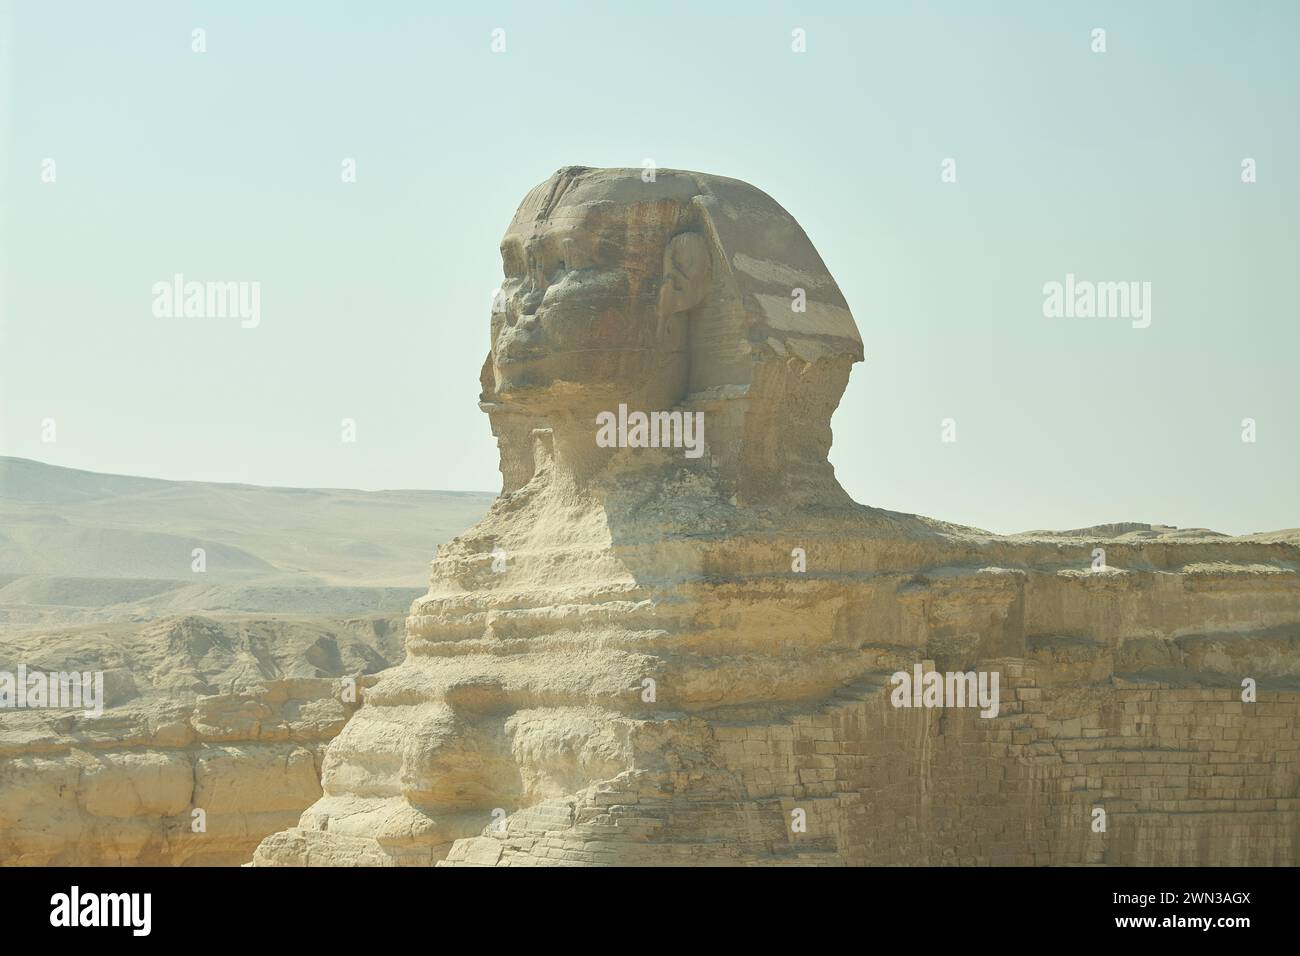 Great Sphinx of Giza. Statue of a mythical creature. Monumental sculpture in Egypt. Most visited Egyptian landmark. Vacation destination. Historic sit Stock Photo